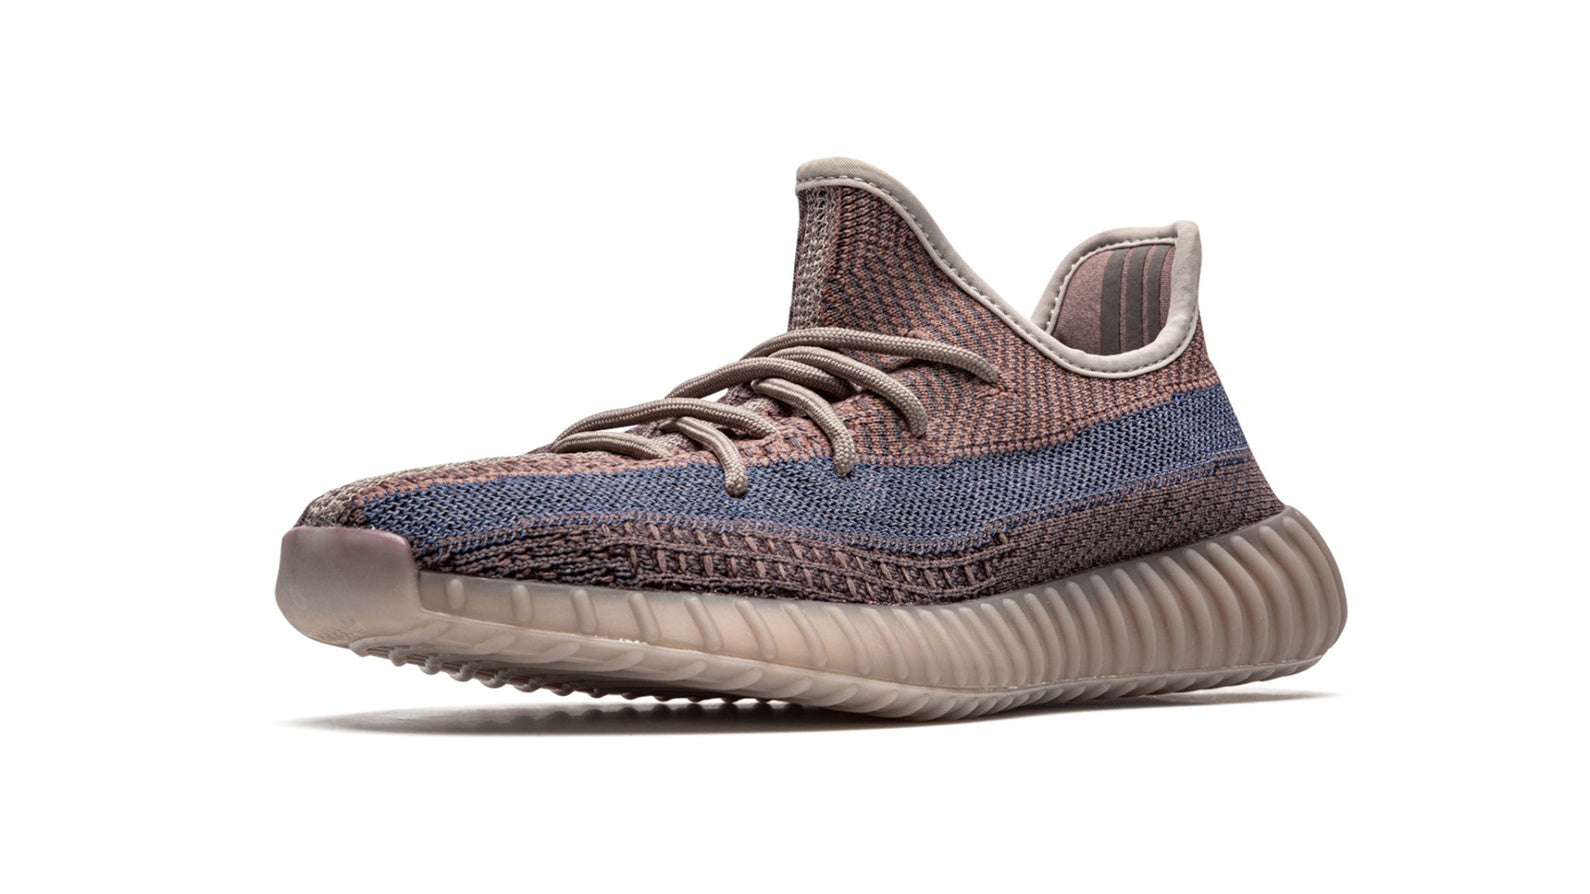 Yeezy Boost 350 V2 Fade – H02795